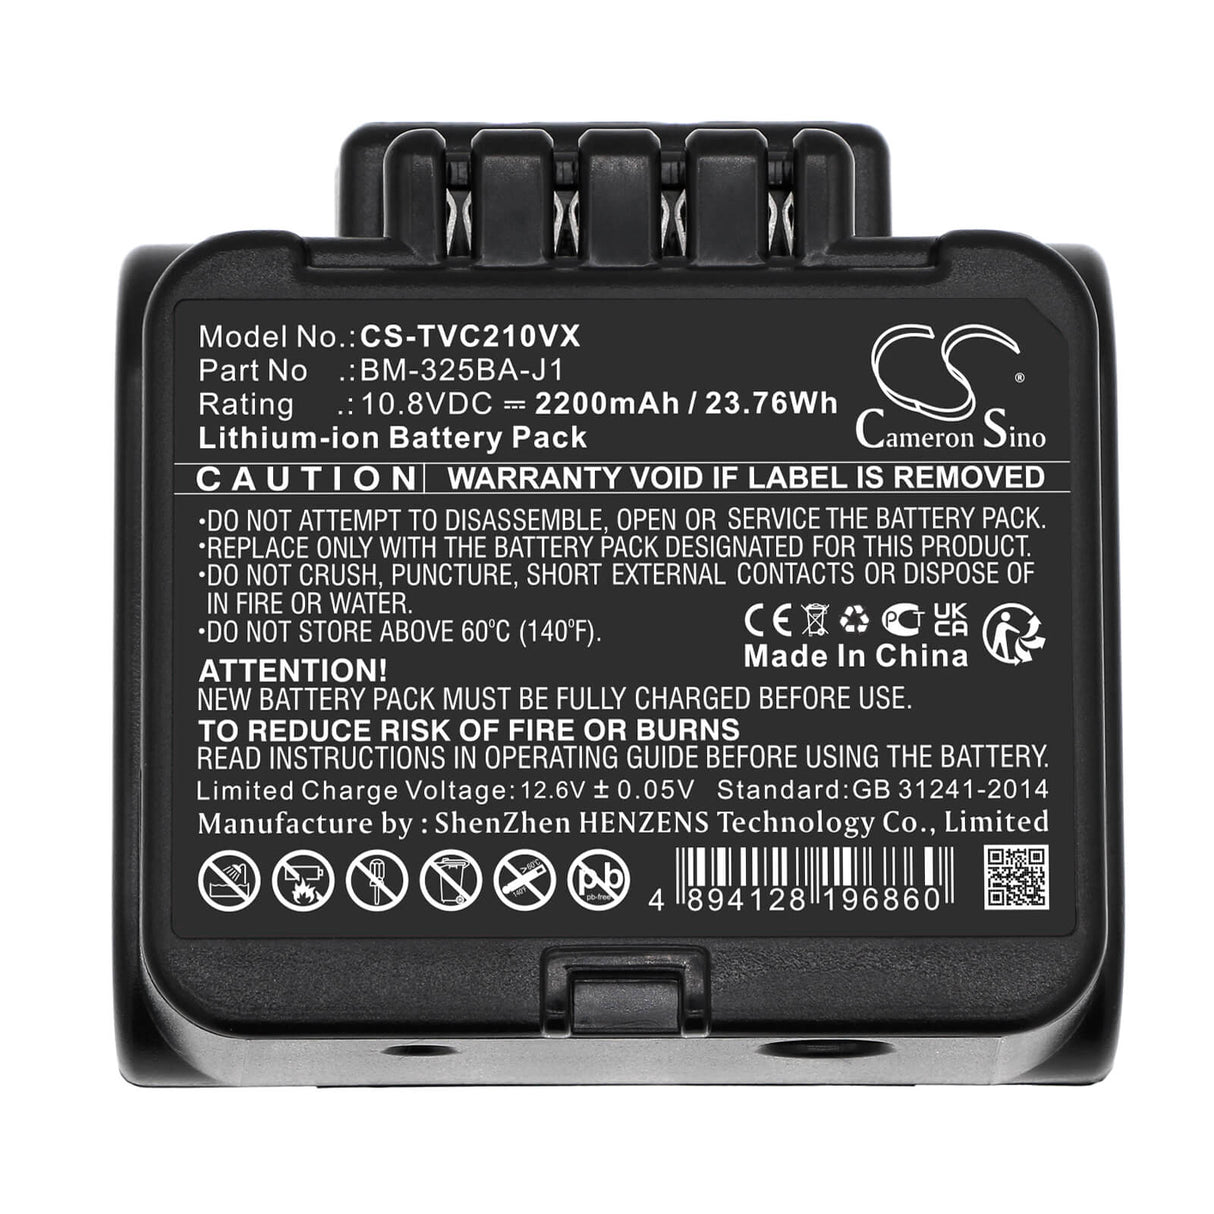 10.8v, Li-ion, 2200mah, Battery Fits Toshiba, Vc-clw21, Vc-clw21-n, 23.76wh Batteries for Electronics Cameron Sino Technology Limited   